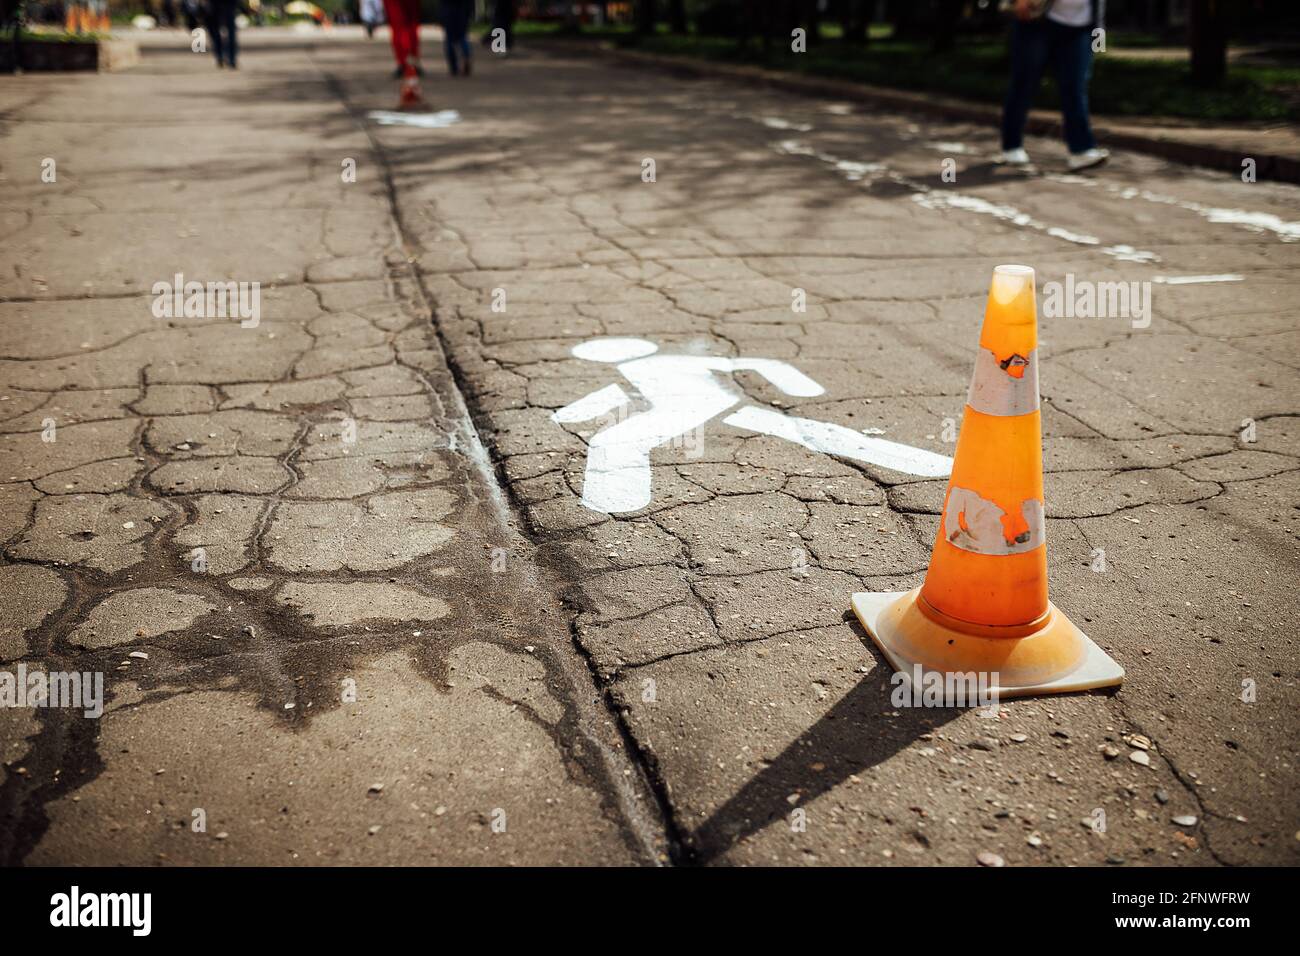 fresh marking of the pedestrian path on the asphalt. the workers painted the symbol of the man with white paint. orange cone warns of roadworks Stock Photo